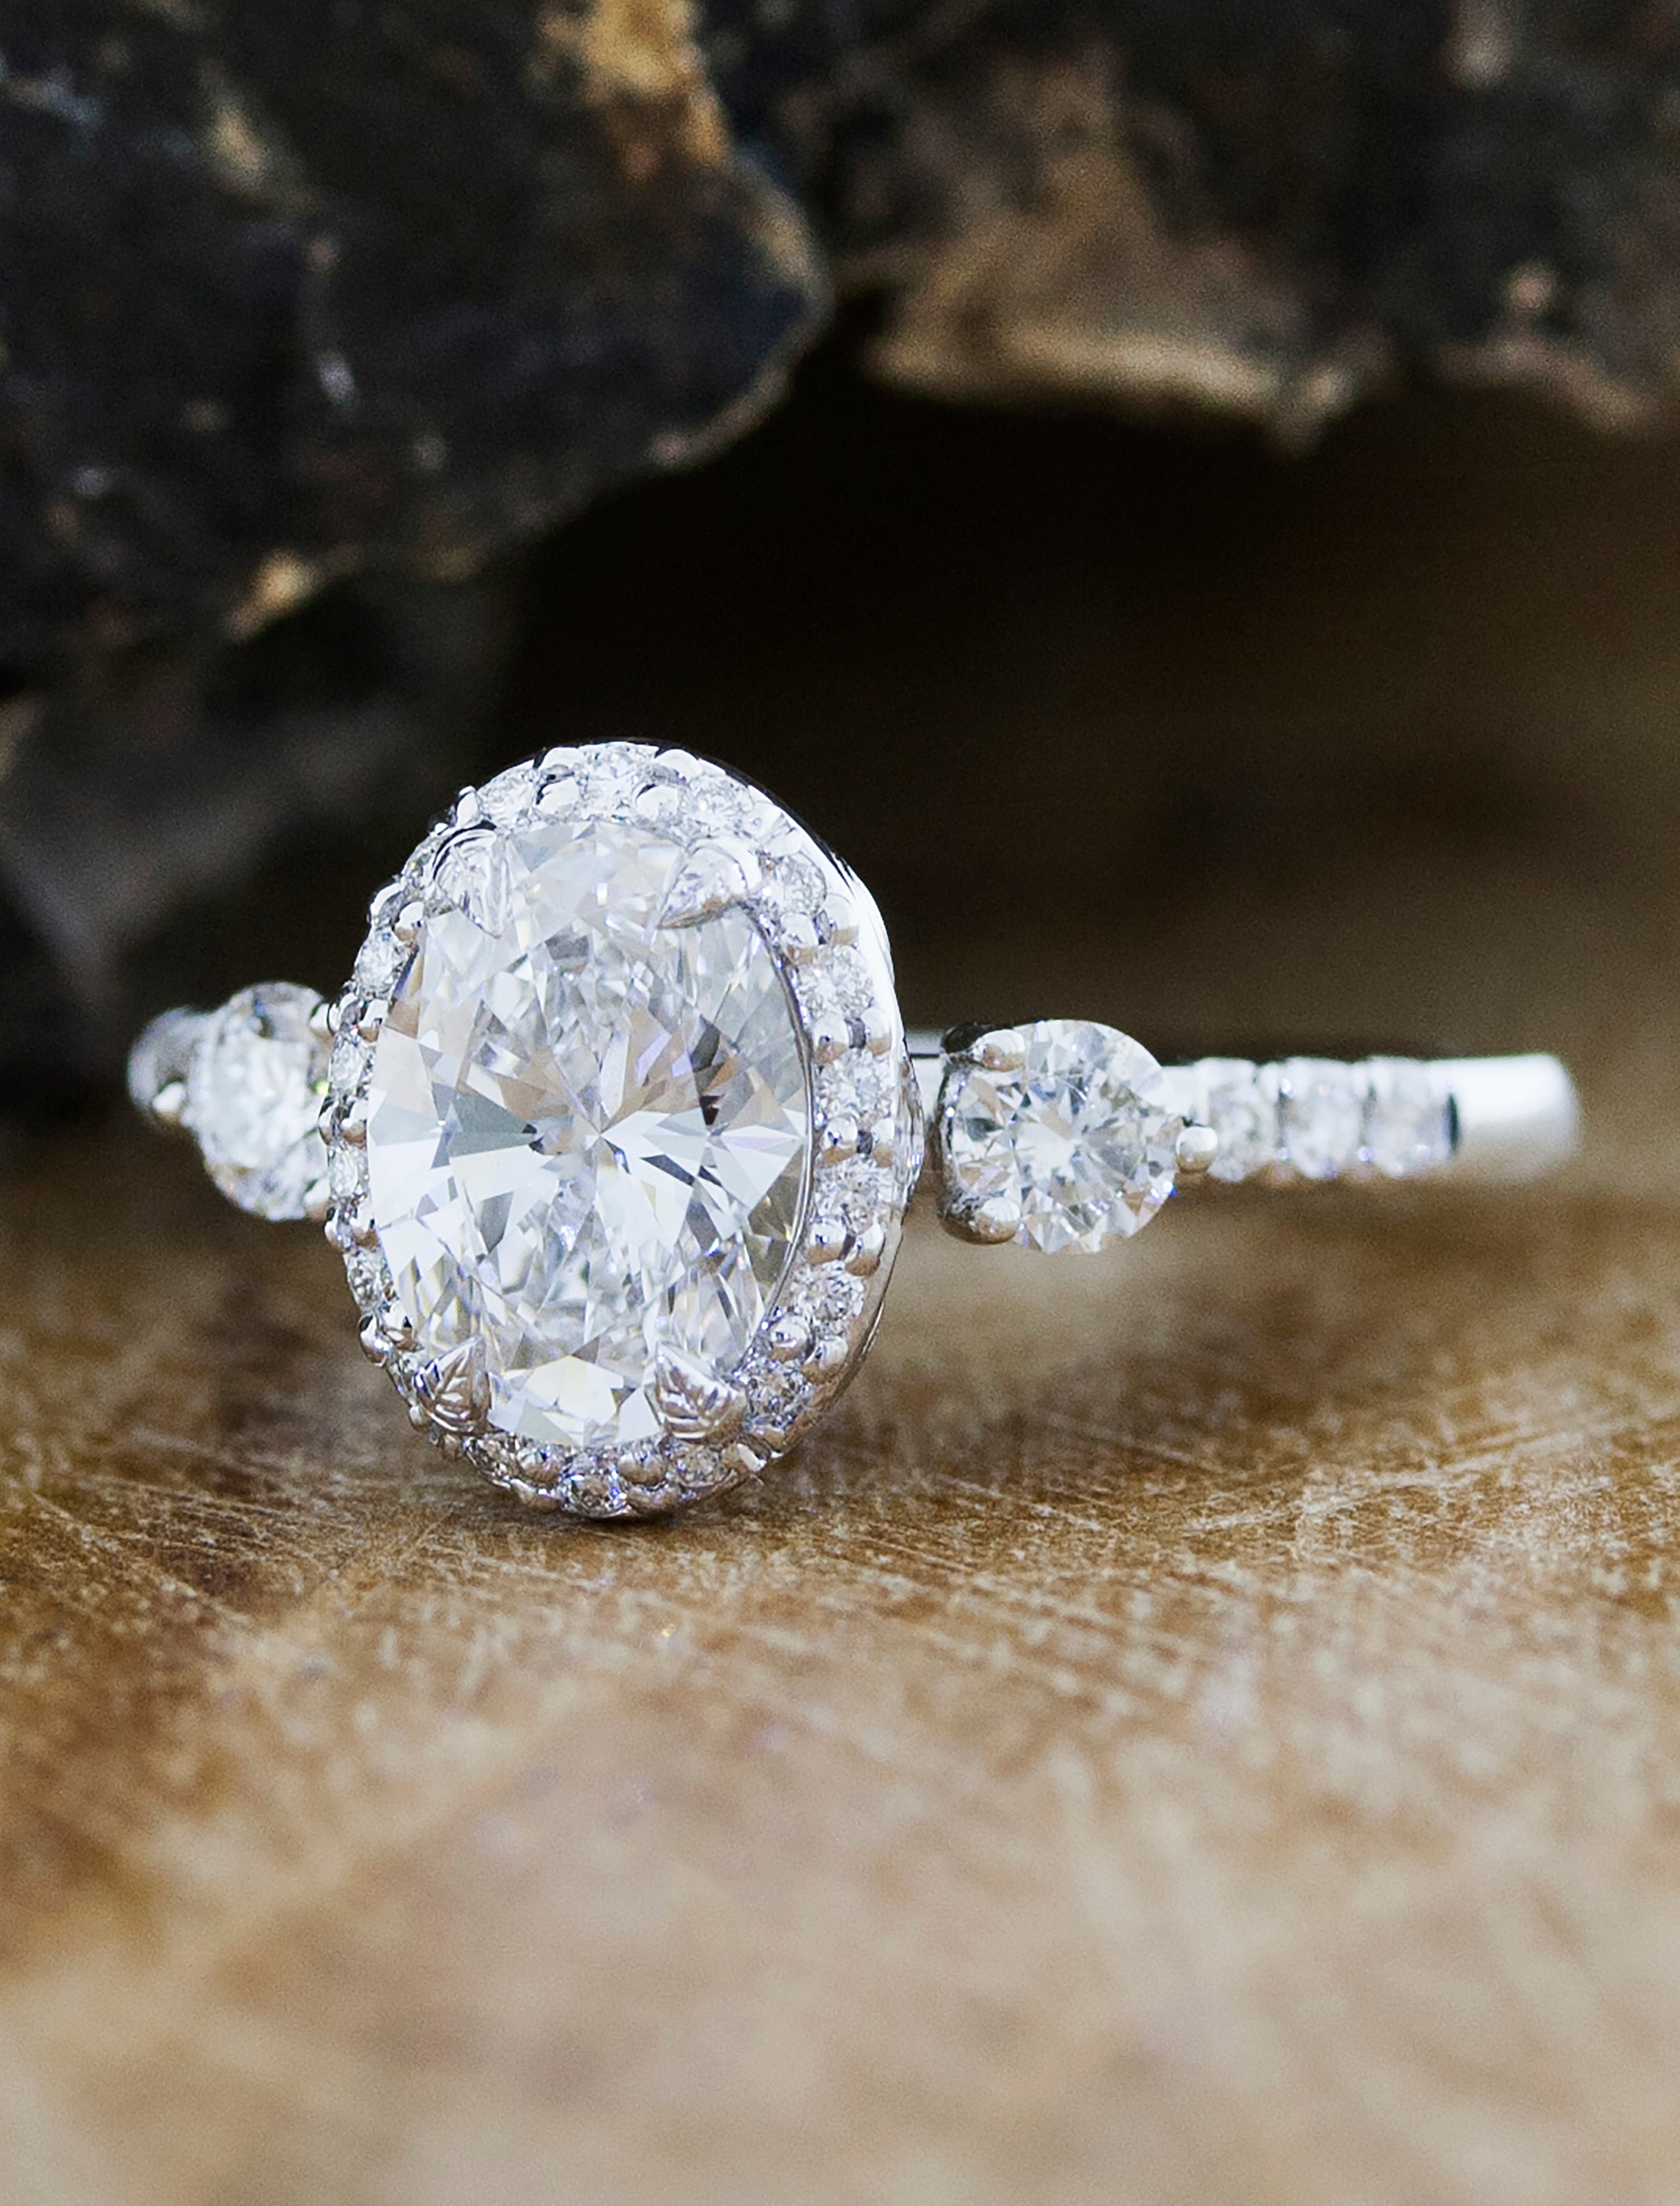 Unique Salt and Pepper Diamond Engagement Ring Gold Halo Heart Ring